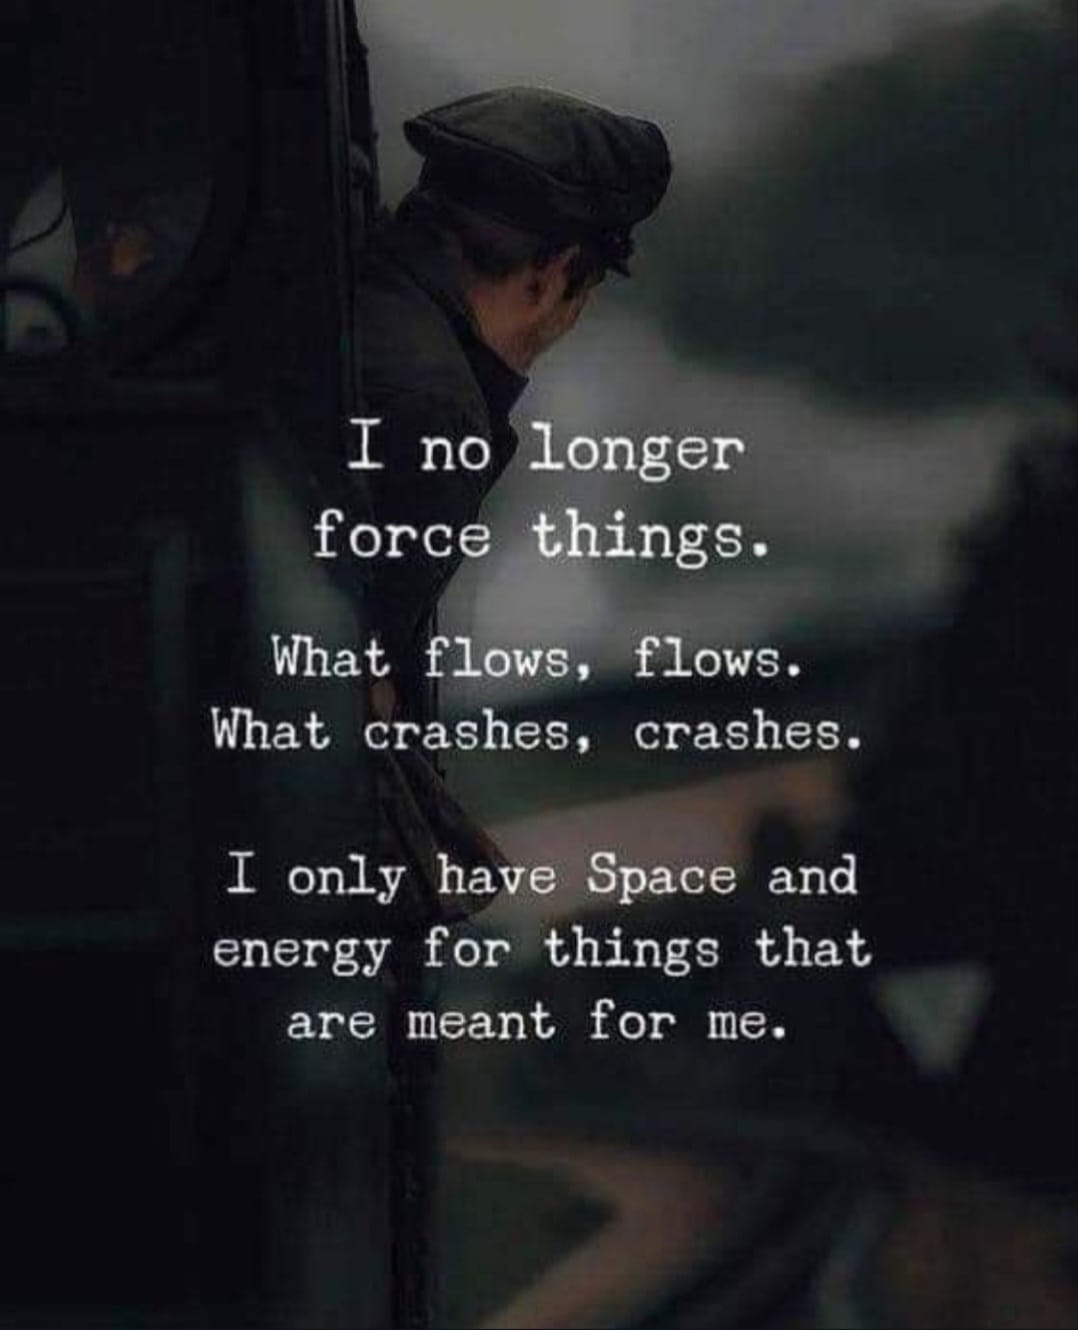 I no longer force things. What flows, flows. What crashes, crashes.